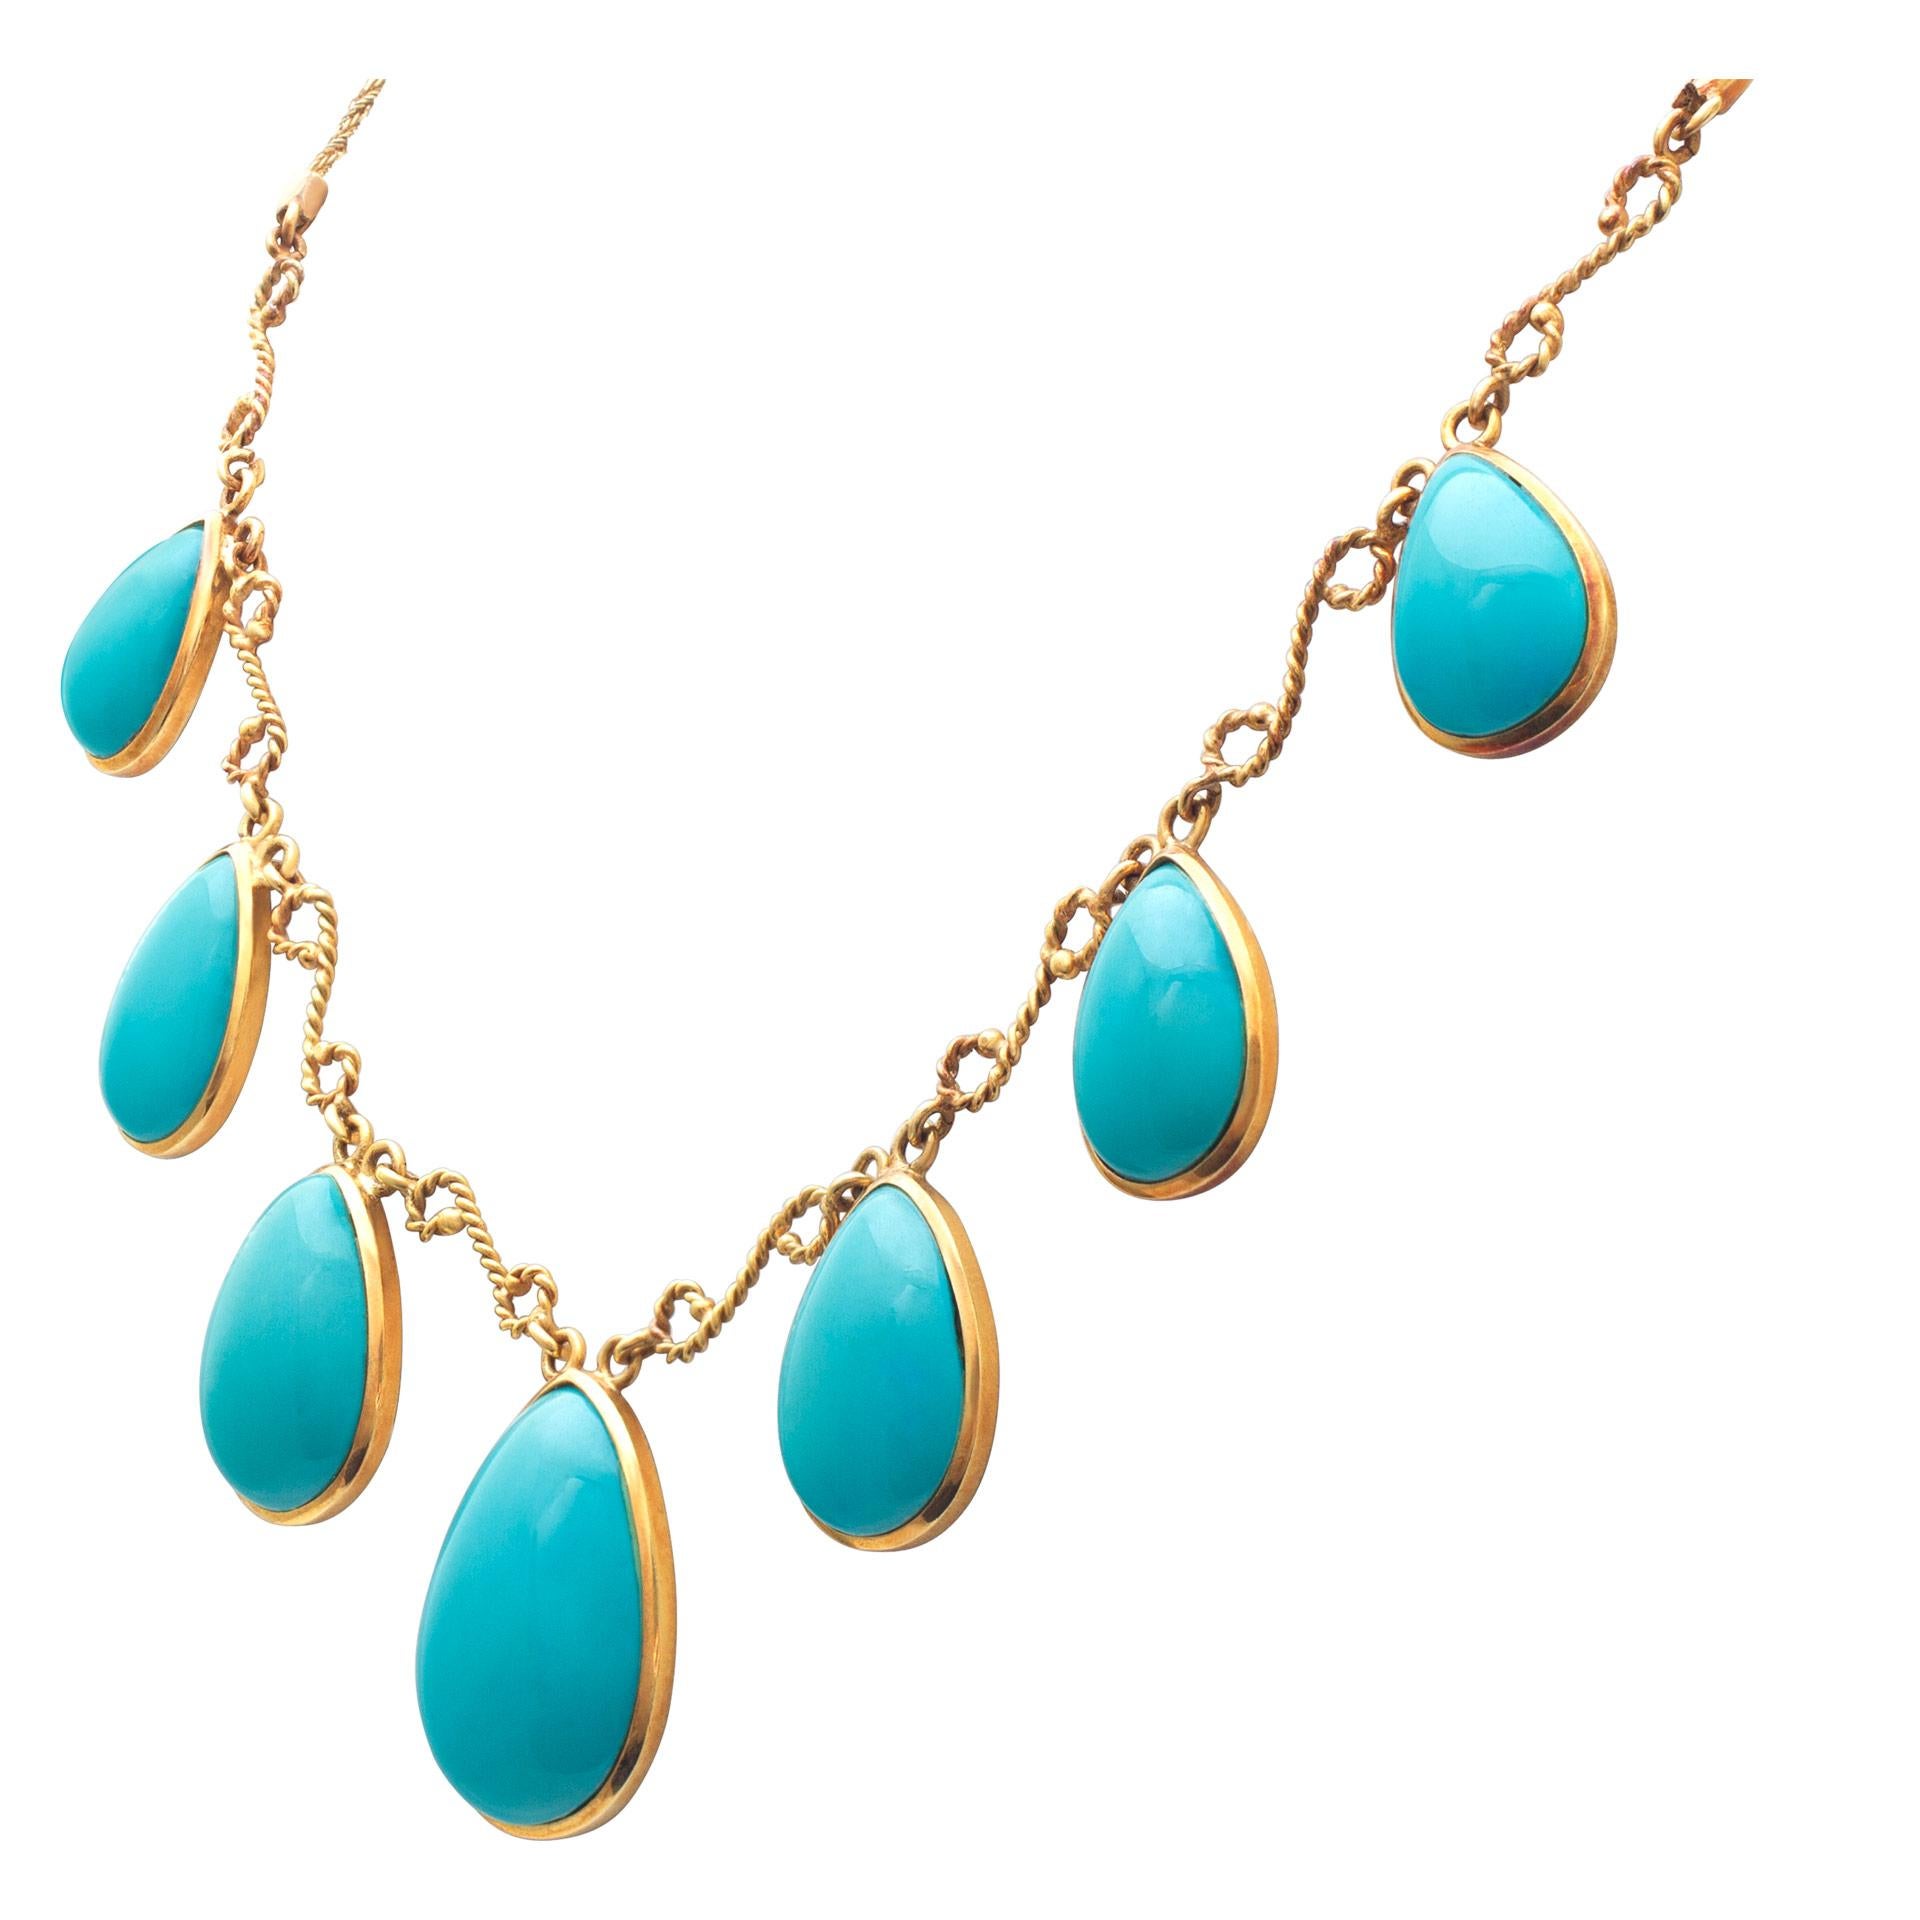 Women's Set for a Queen! Turquoise Necklace, Earring & Ring Set in 18k